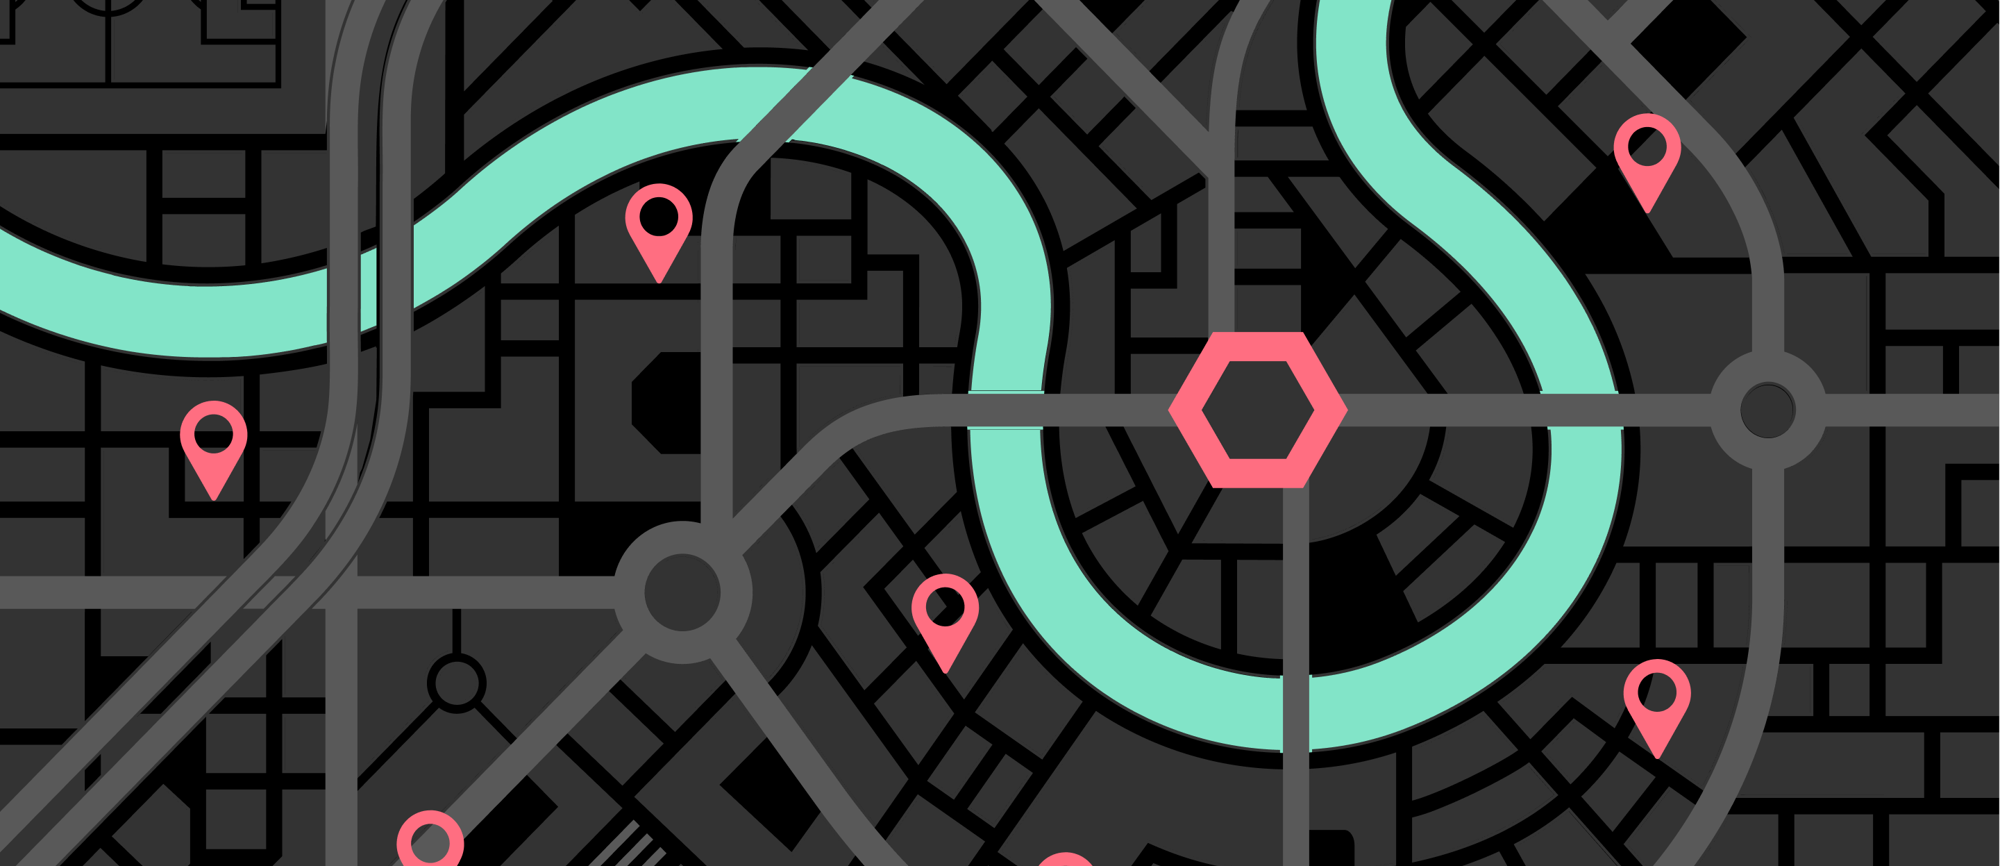 How to make local SEO work for your business